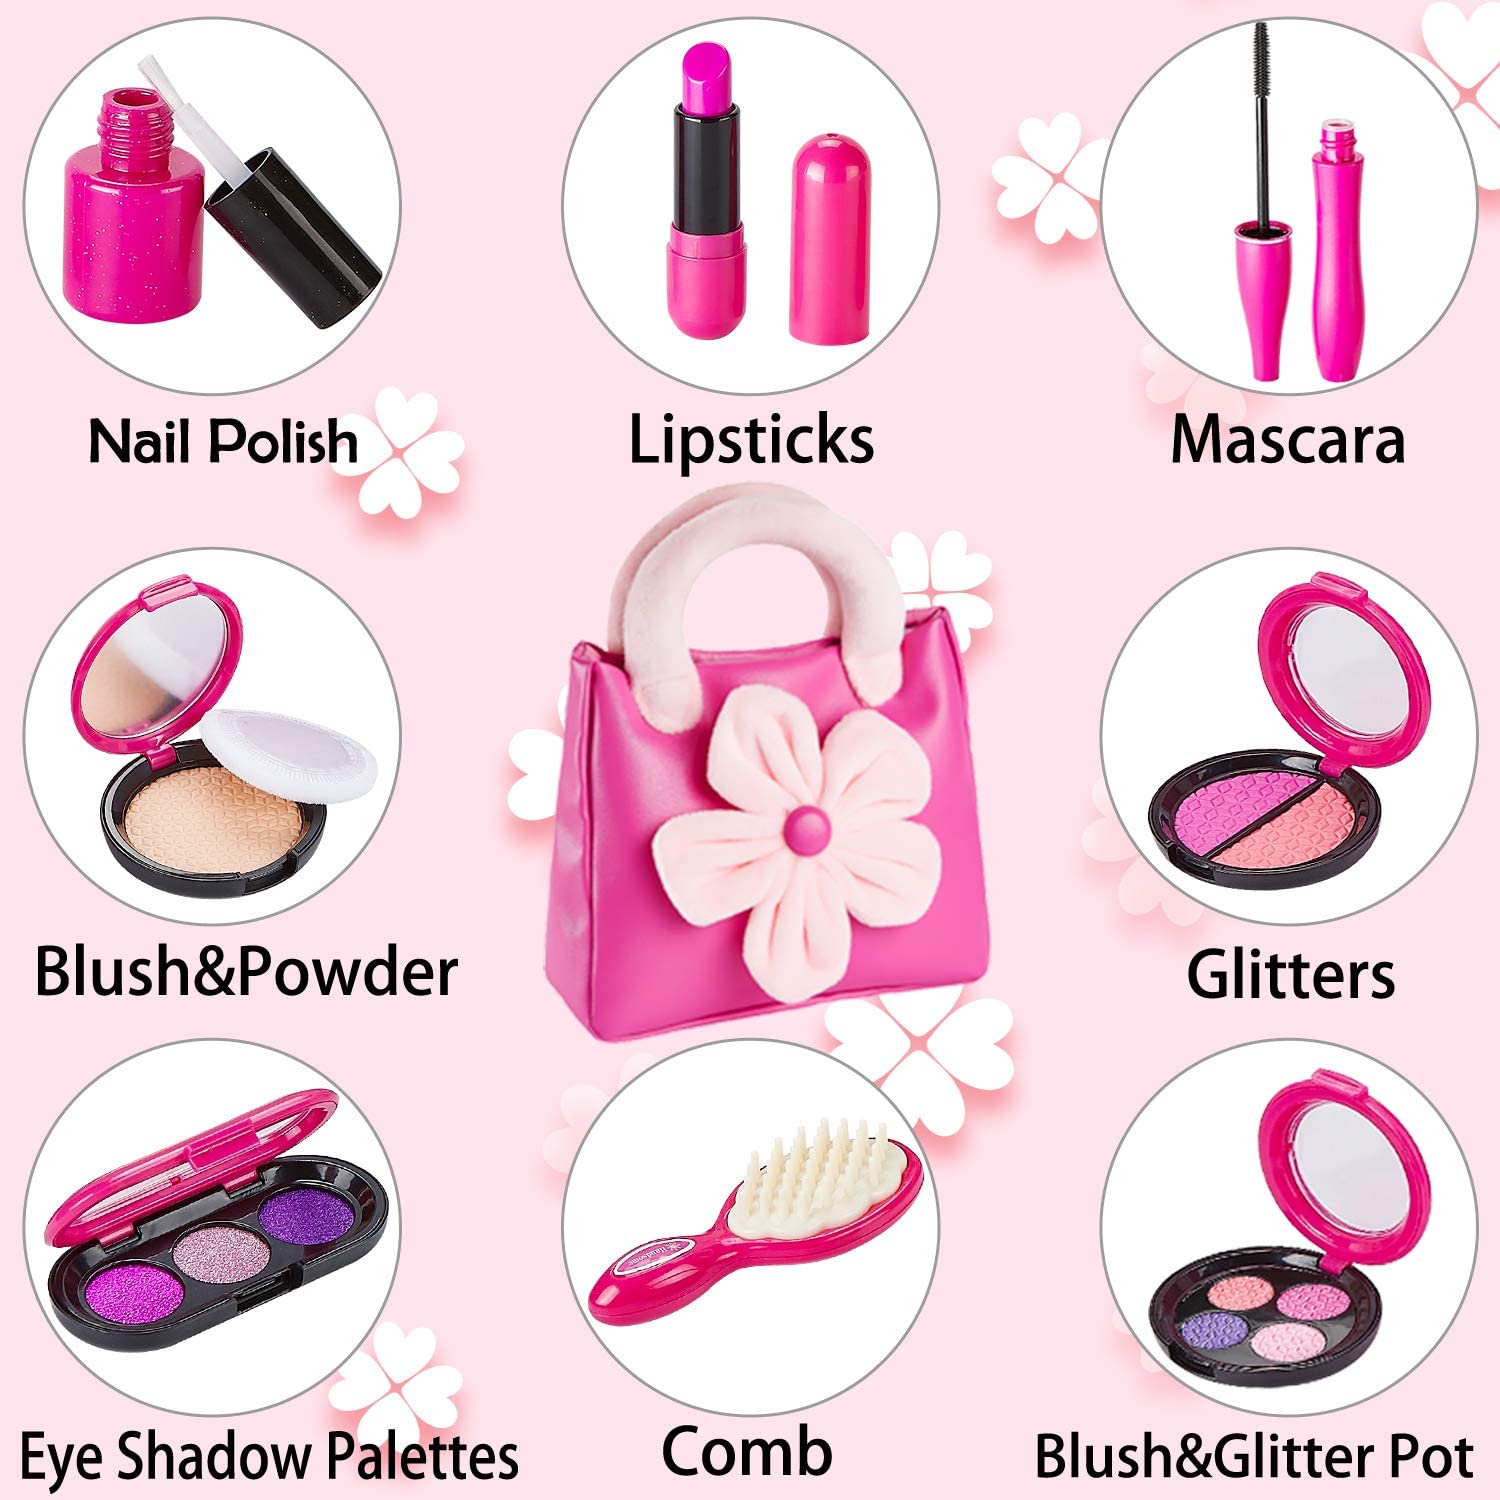 Play Makeup Set with Pink Floral Tote Bag for Little Girls Age 3+